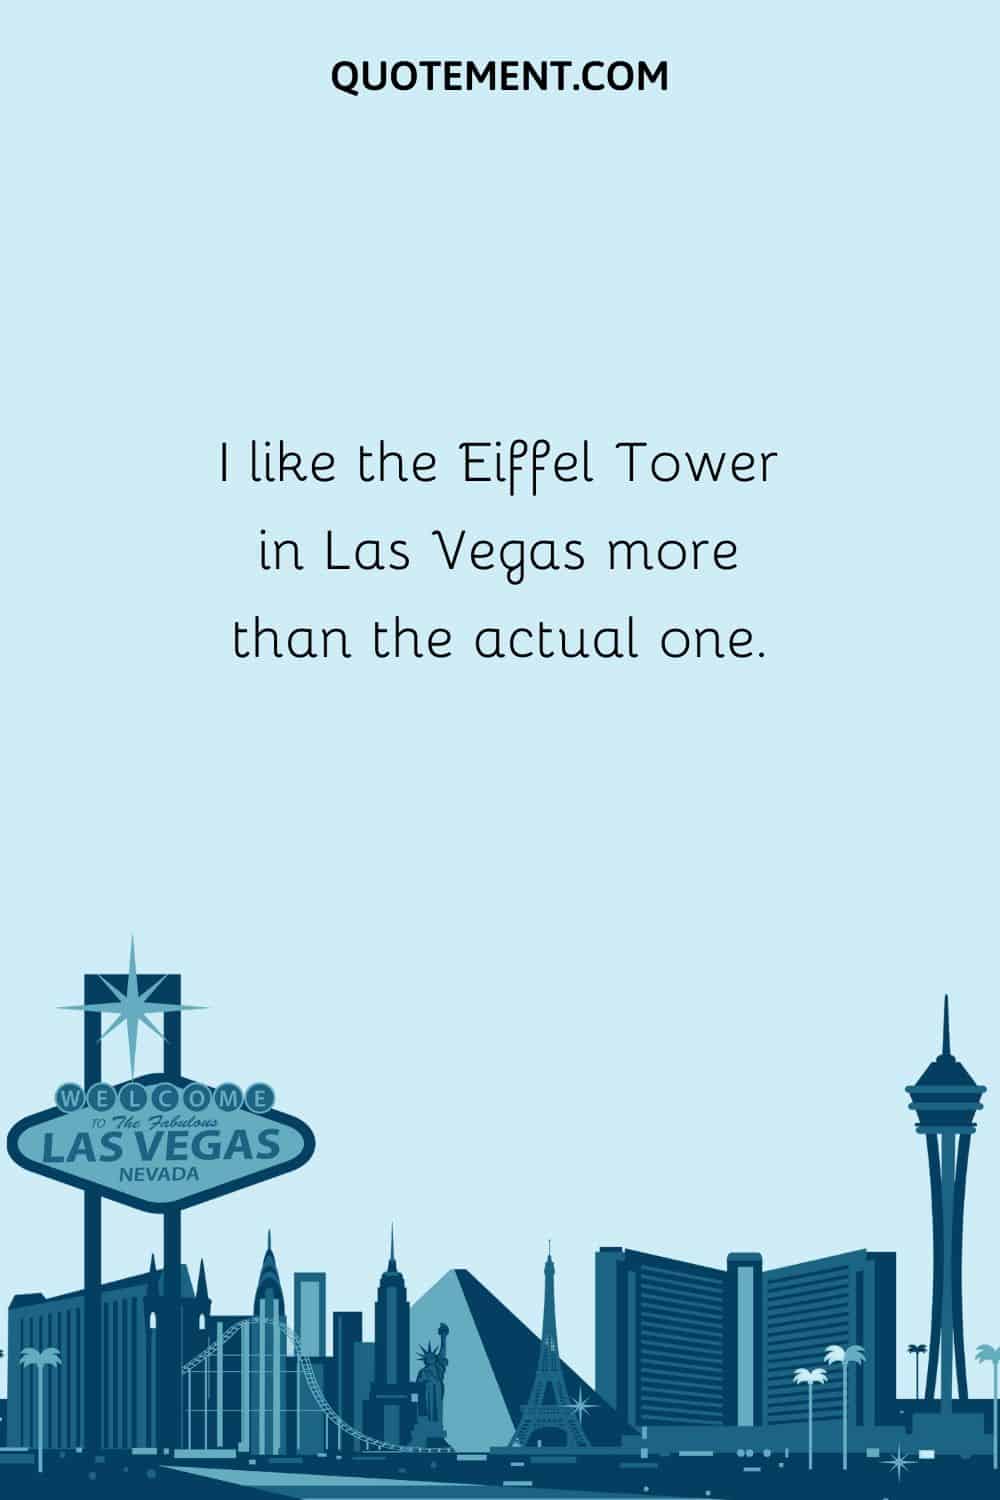 I like the Eiffel Tower in Las Vegas more than the actual one.